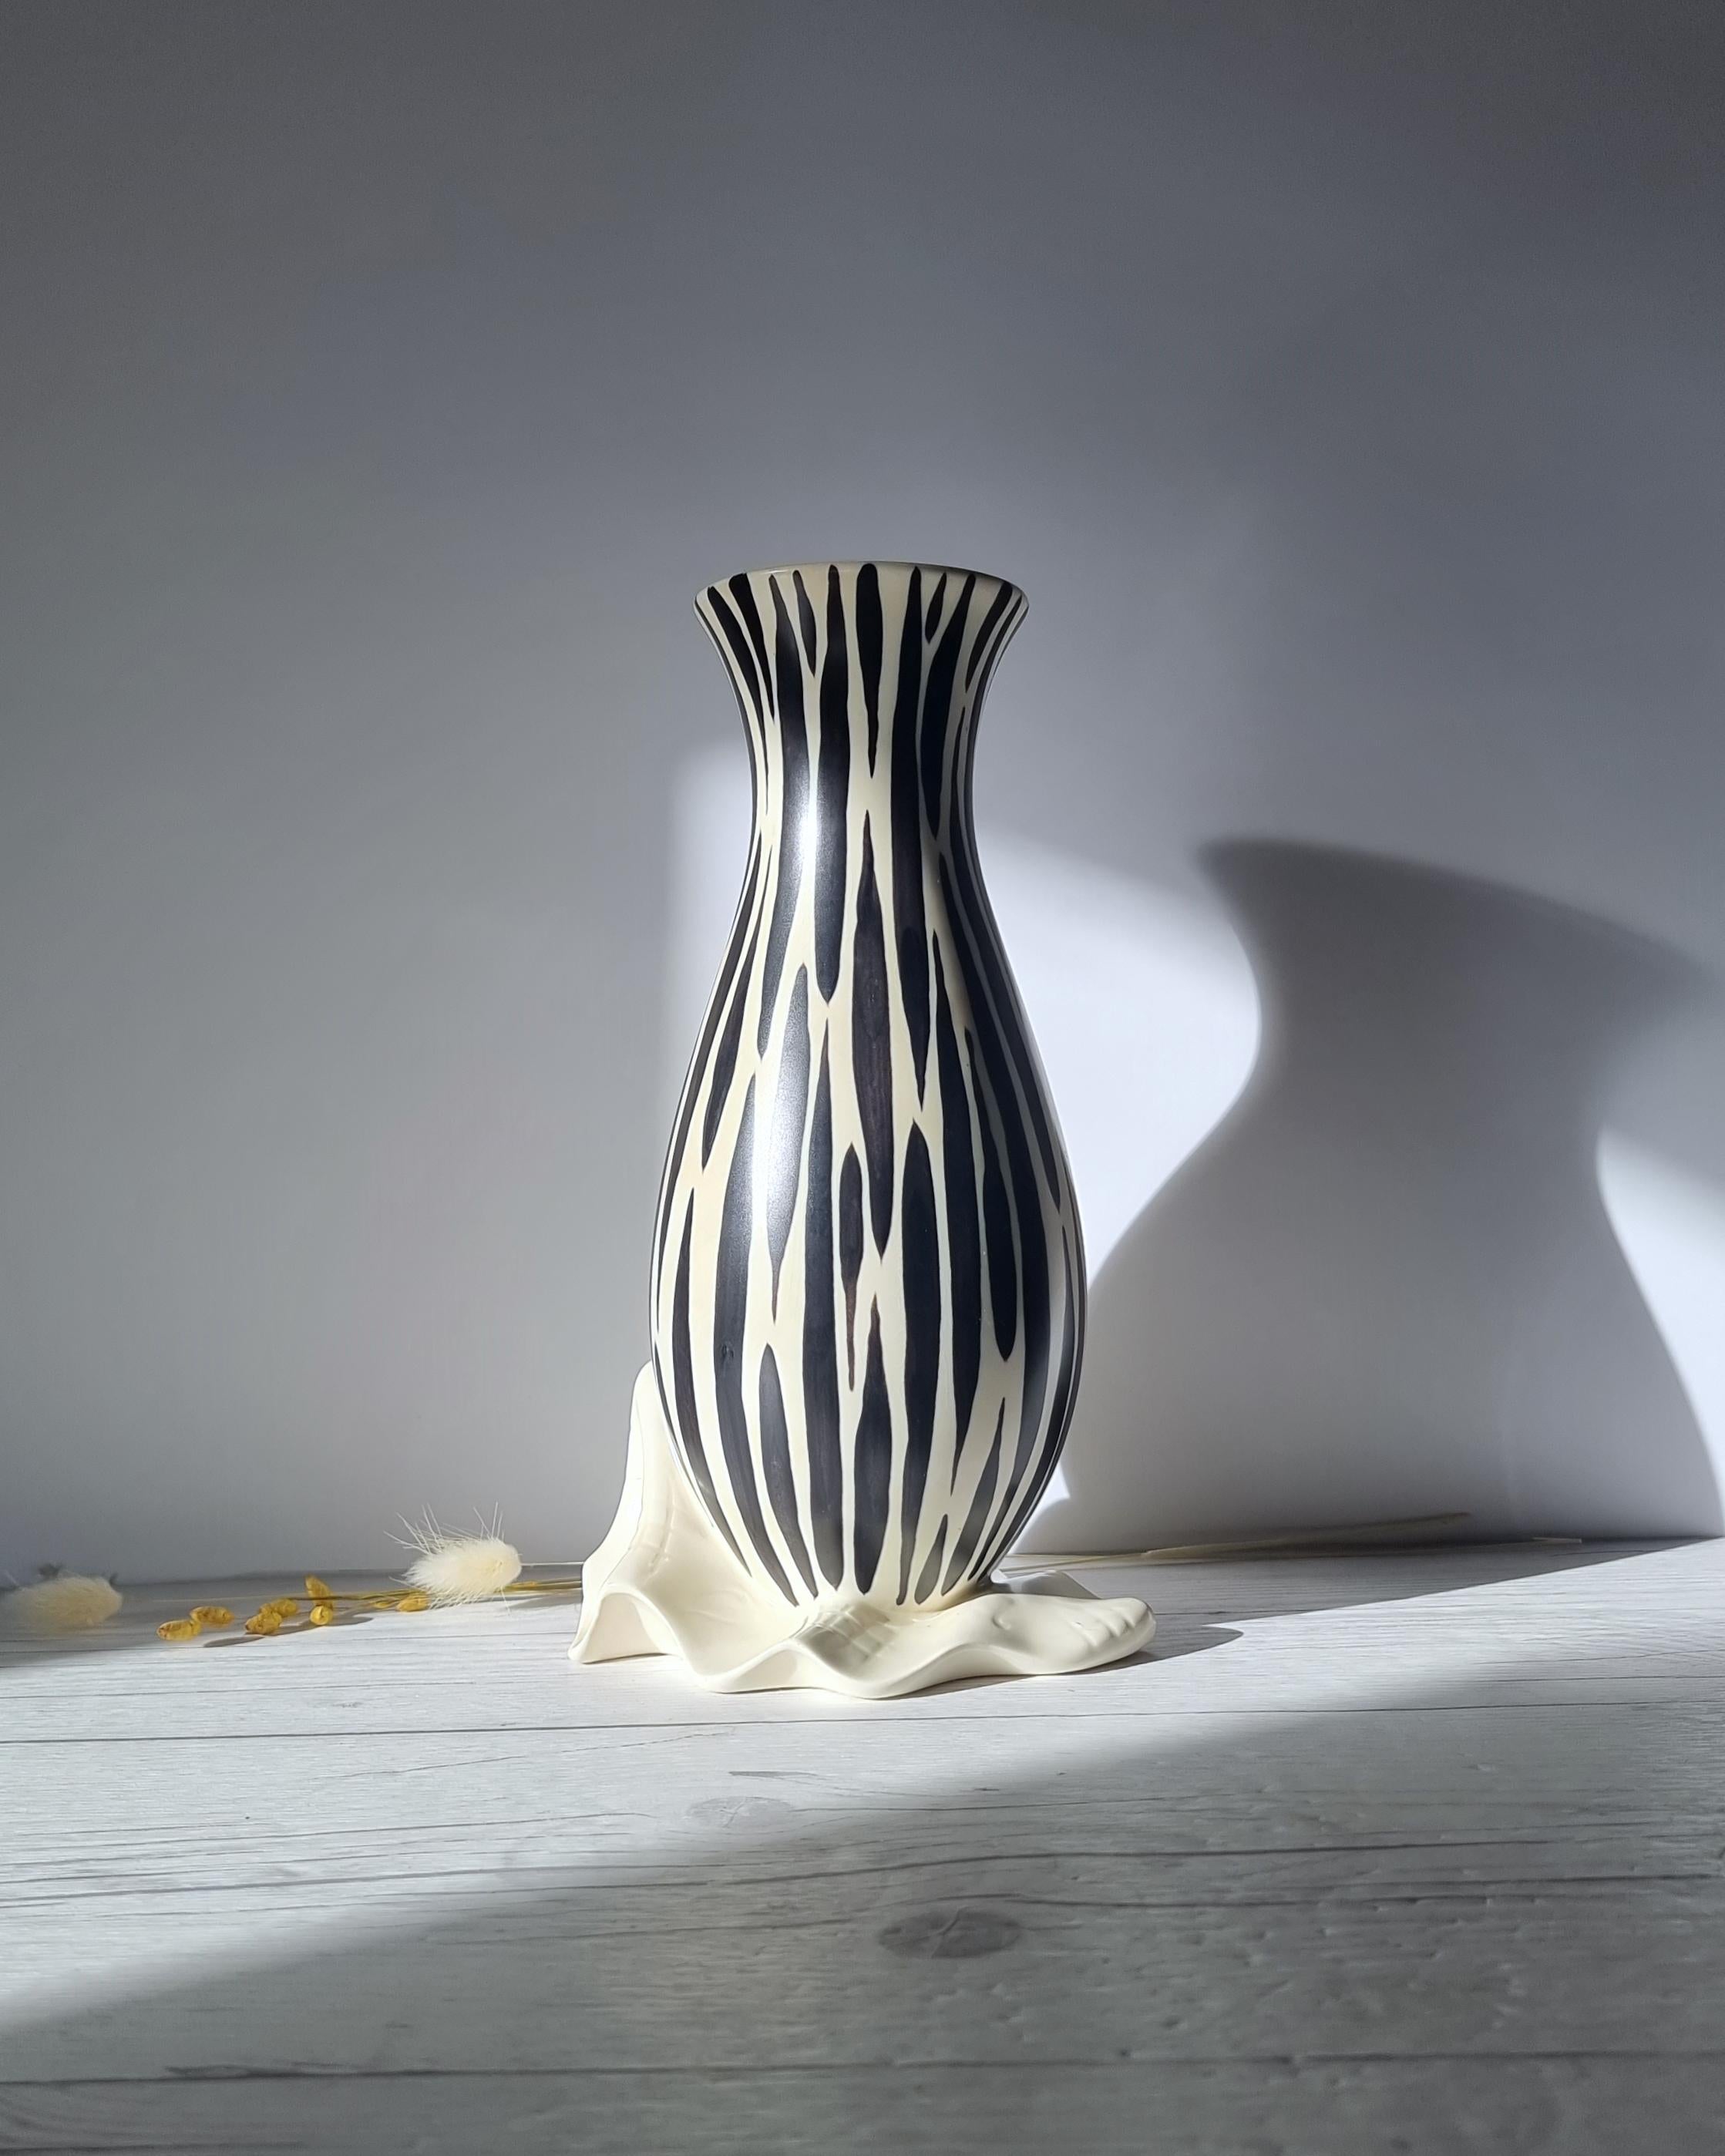 This vivid work of of mid-century Modernist design is by Albert Hallam for British Pottery Beswick, a firmly celebrated name in British ceramics design. The stylised and elegant bottle form rested against the draped cushioning is just one of a range